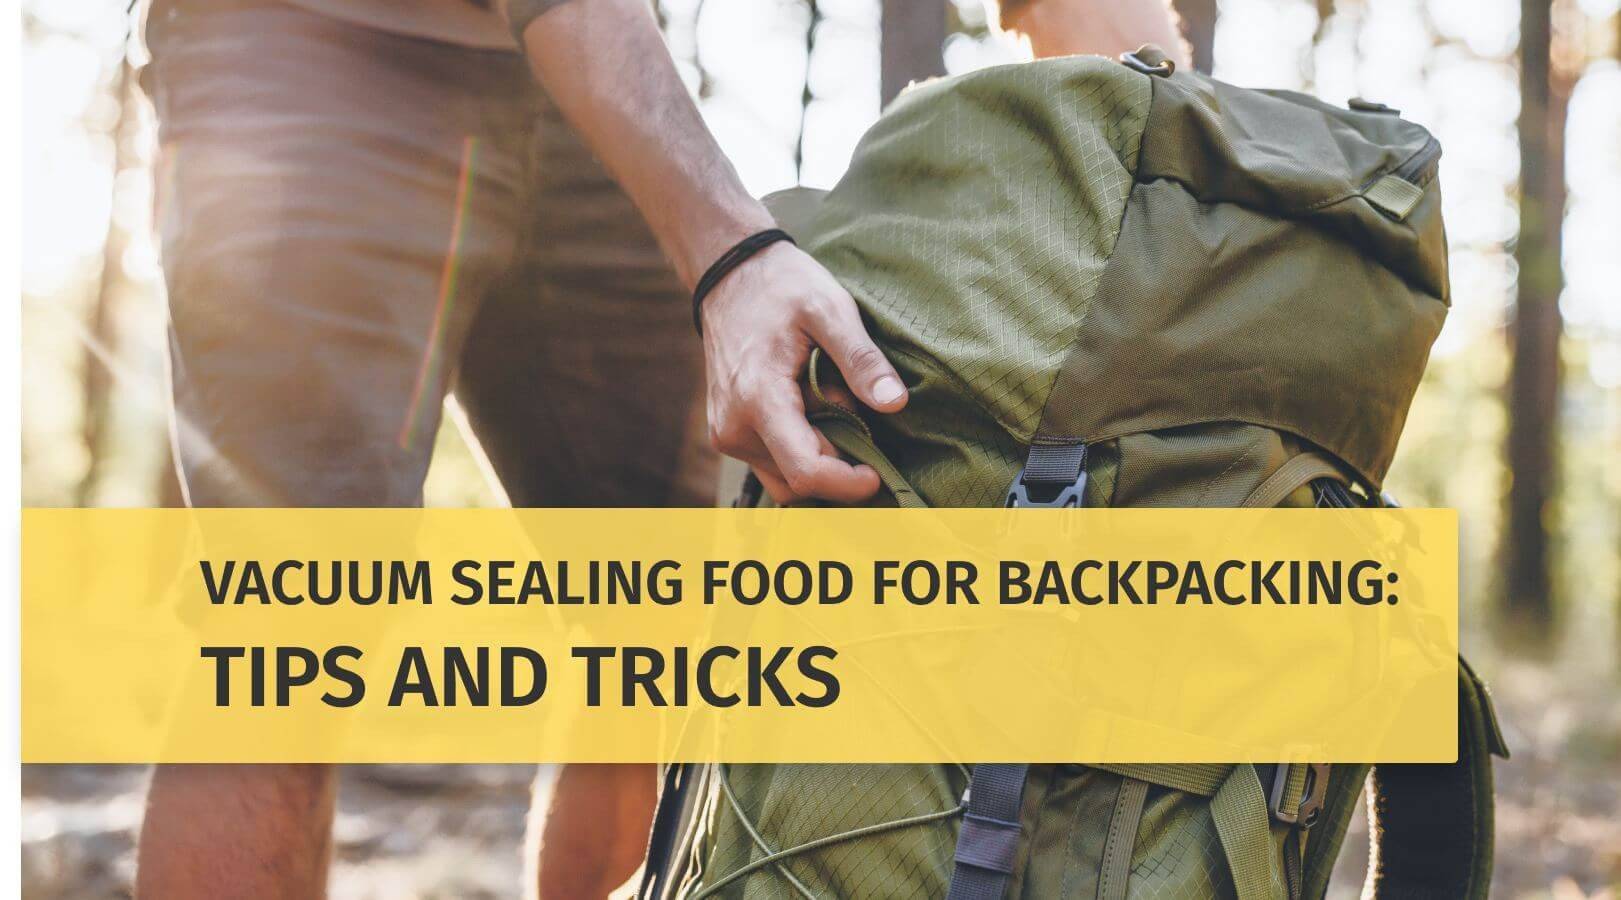 Vacuum Sealing Food for Backpacking: Tips and Tricks